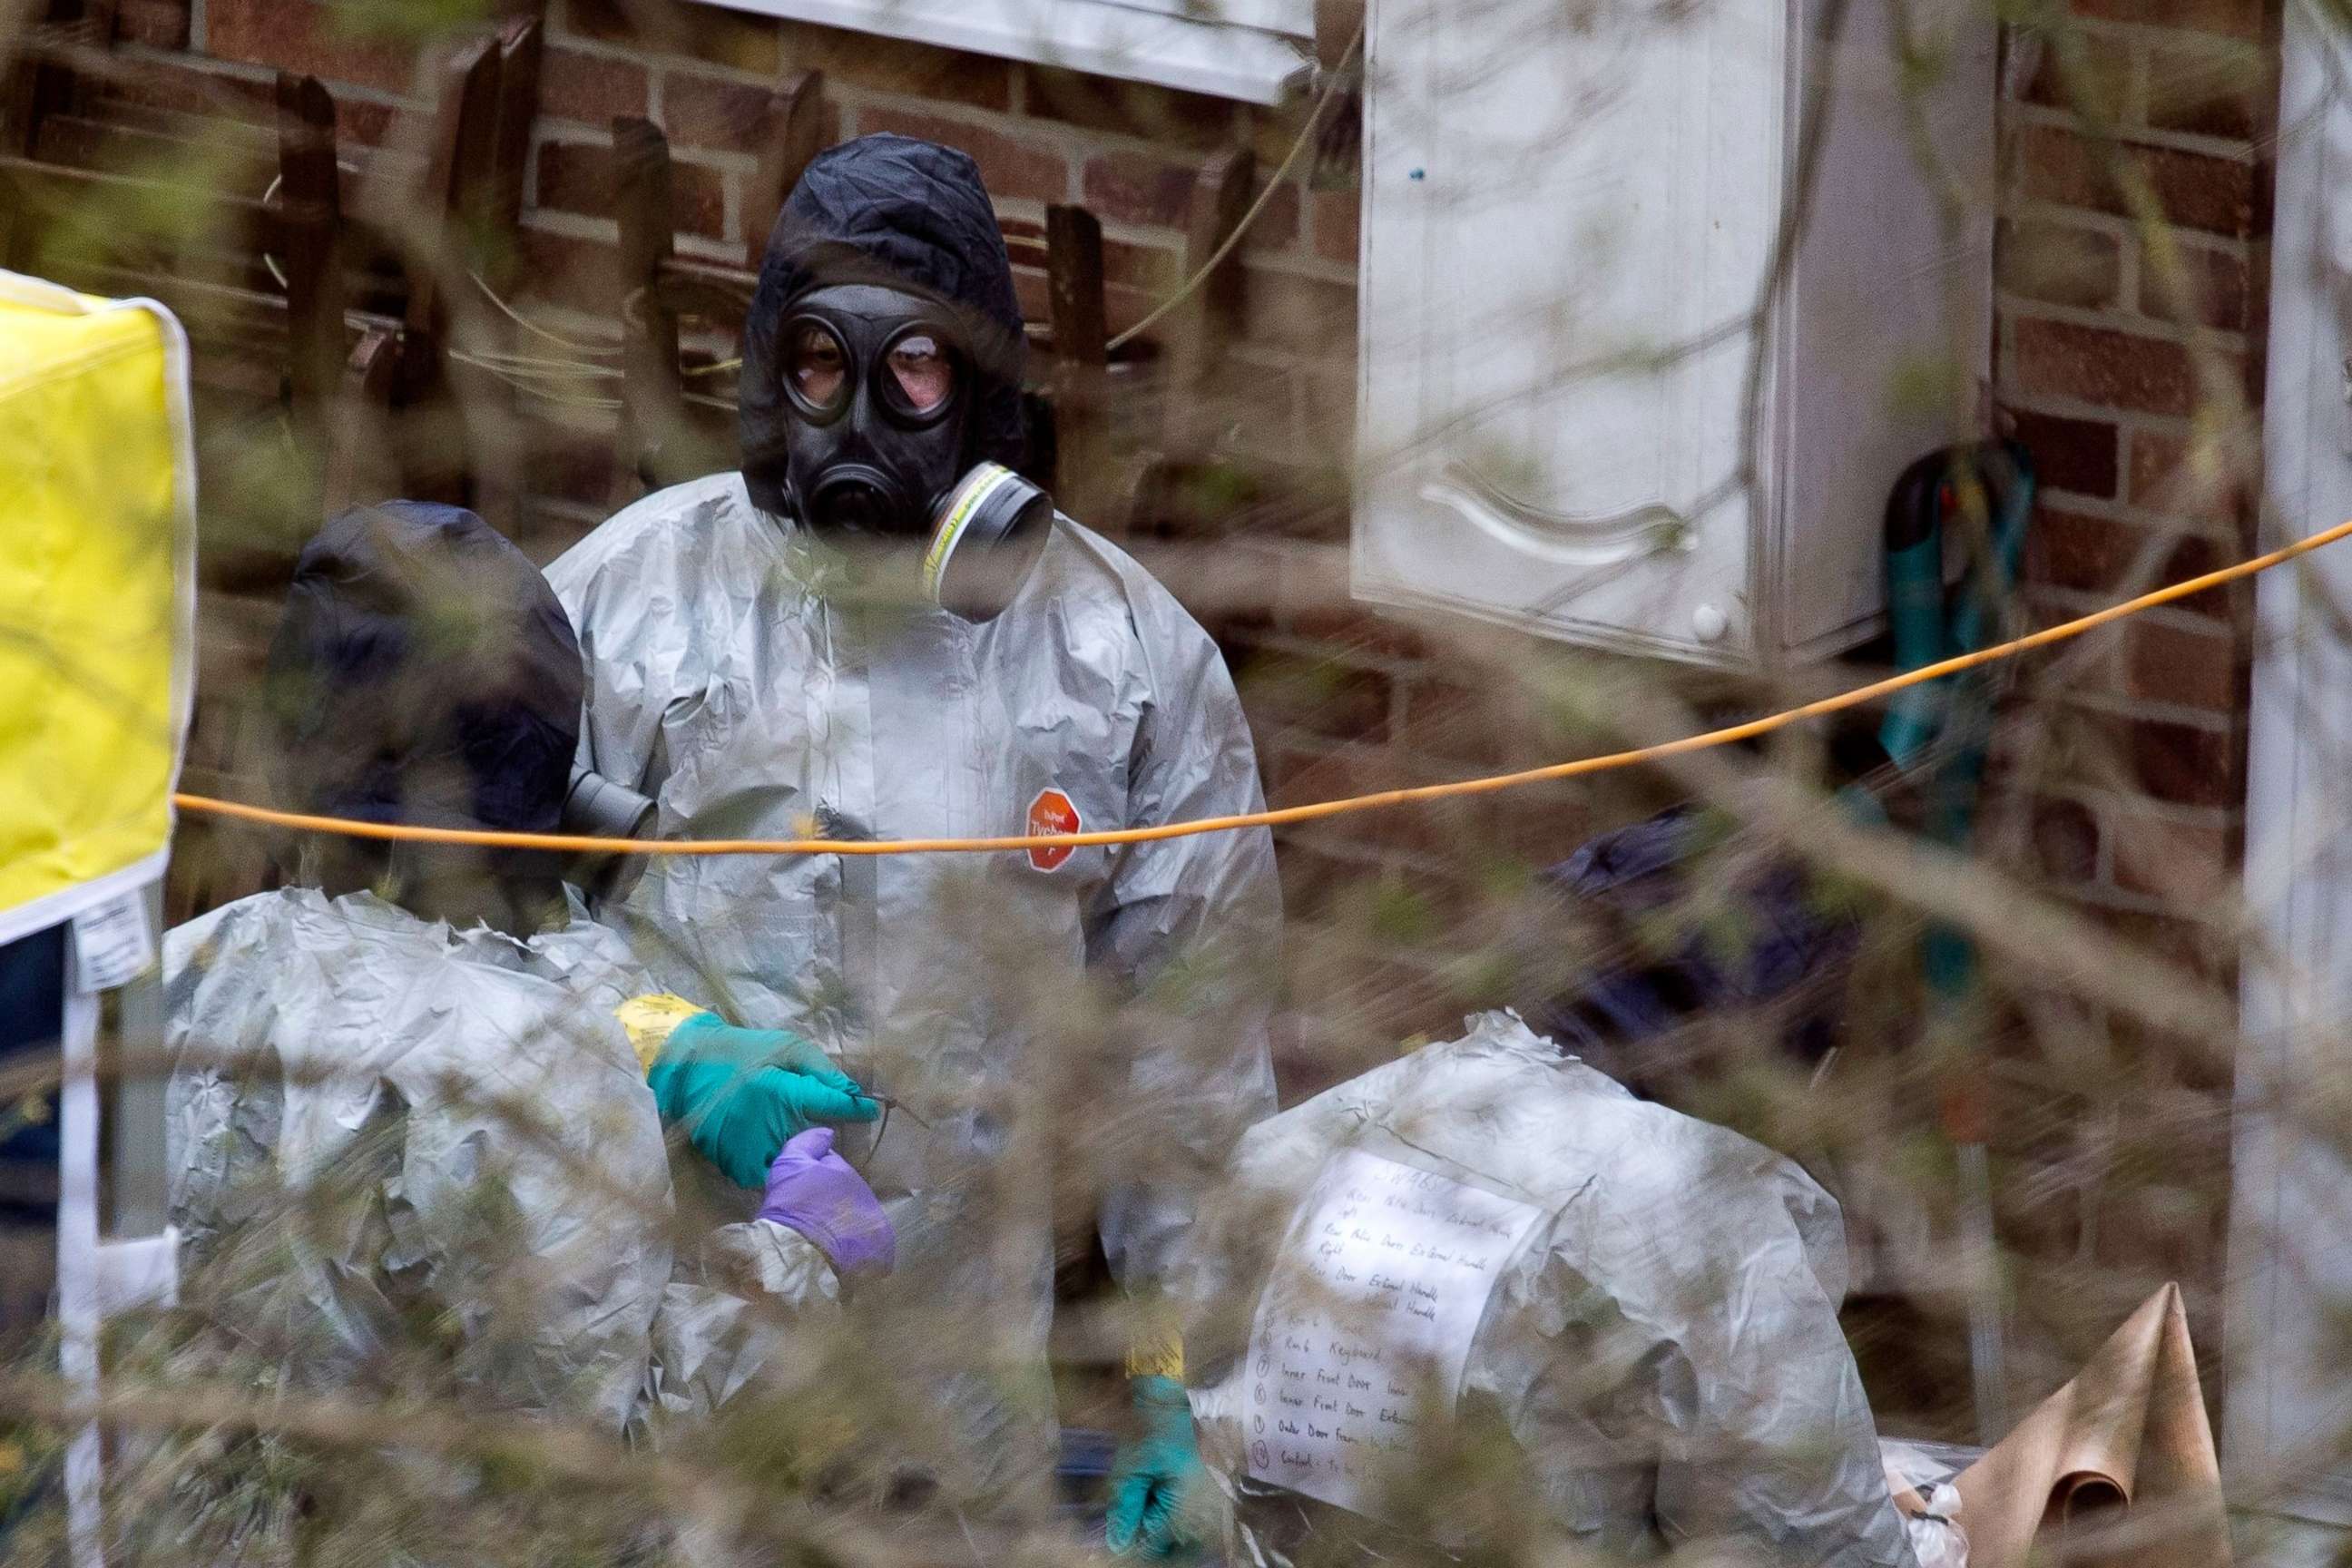 PHOTO: A team believed to be from the Organisation for the Prohibition of Chemical Weapons inspects the back garden of house on the road where former Russian spy Sergei Skripal lived in Salisbury Wiltshire, Britain, March 22, 2018.